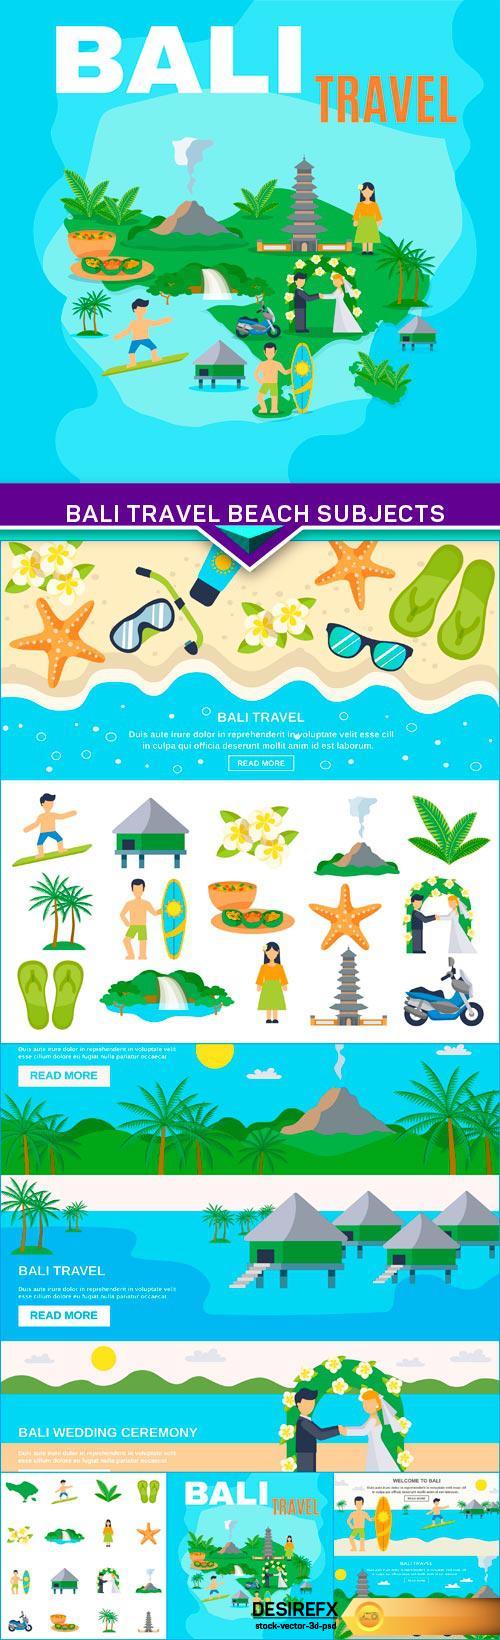 Concept Bali travel beach subjects and tourism goals 5X EPS